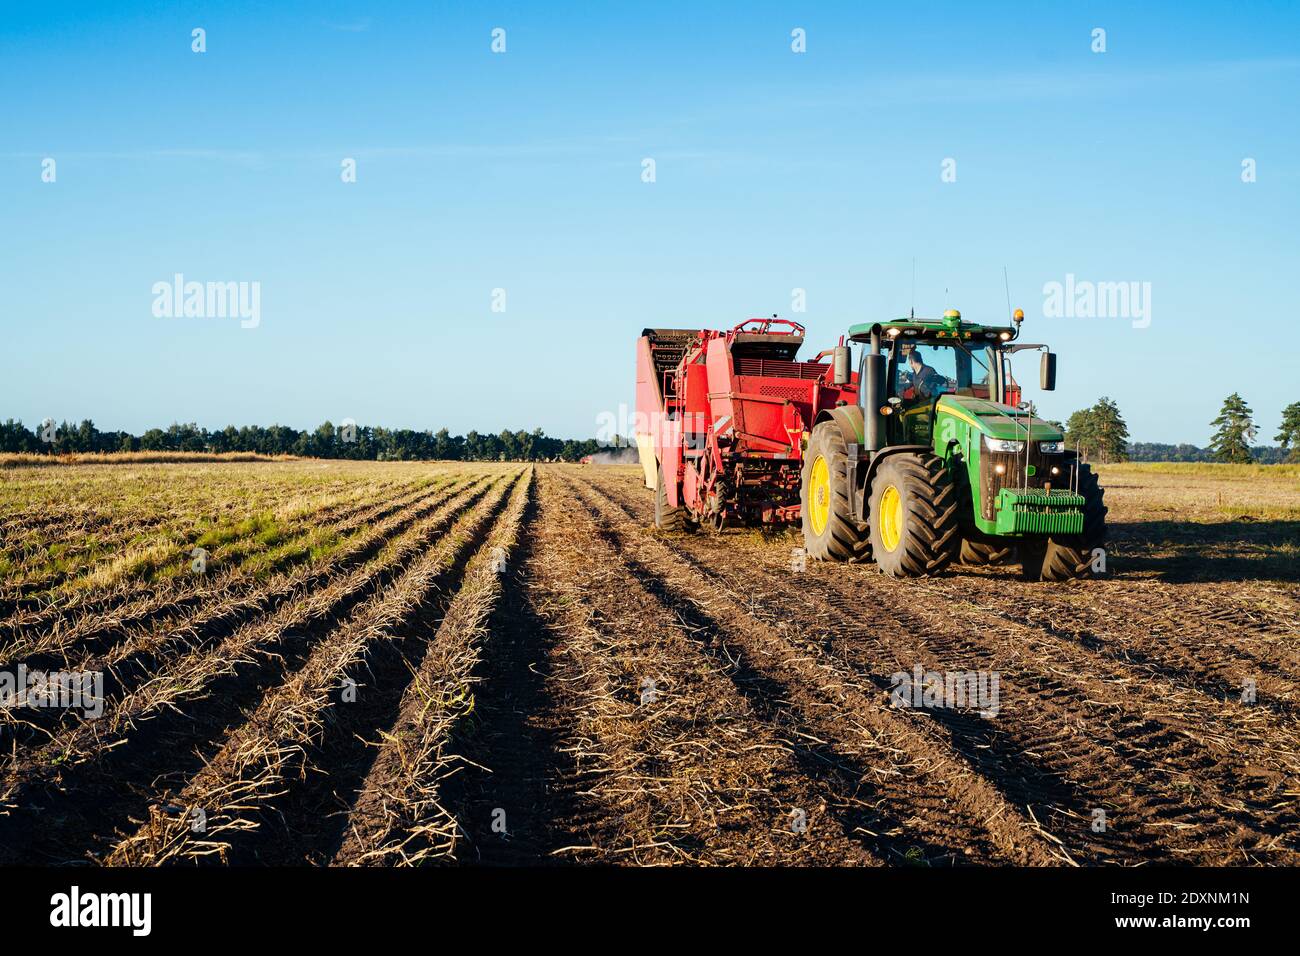 The tractor is harvesting potatoes in the field. Agricultural industry image Stock Photo